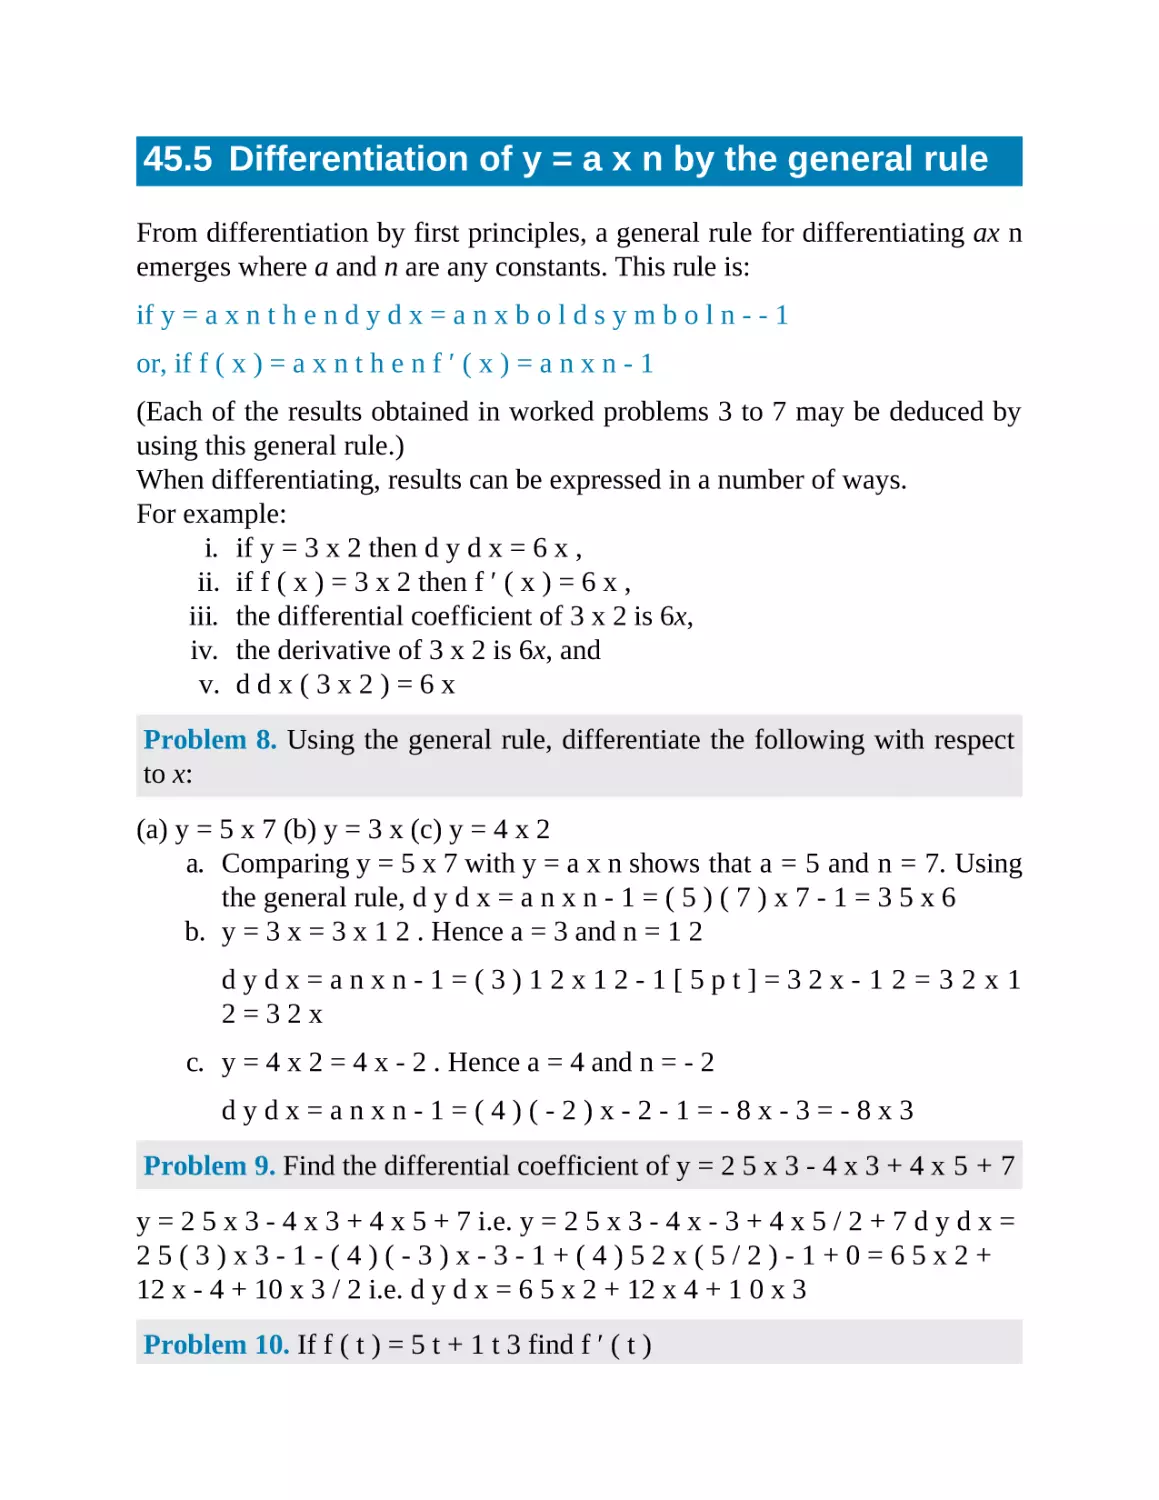 45.5 Differentiation of by the general rule